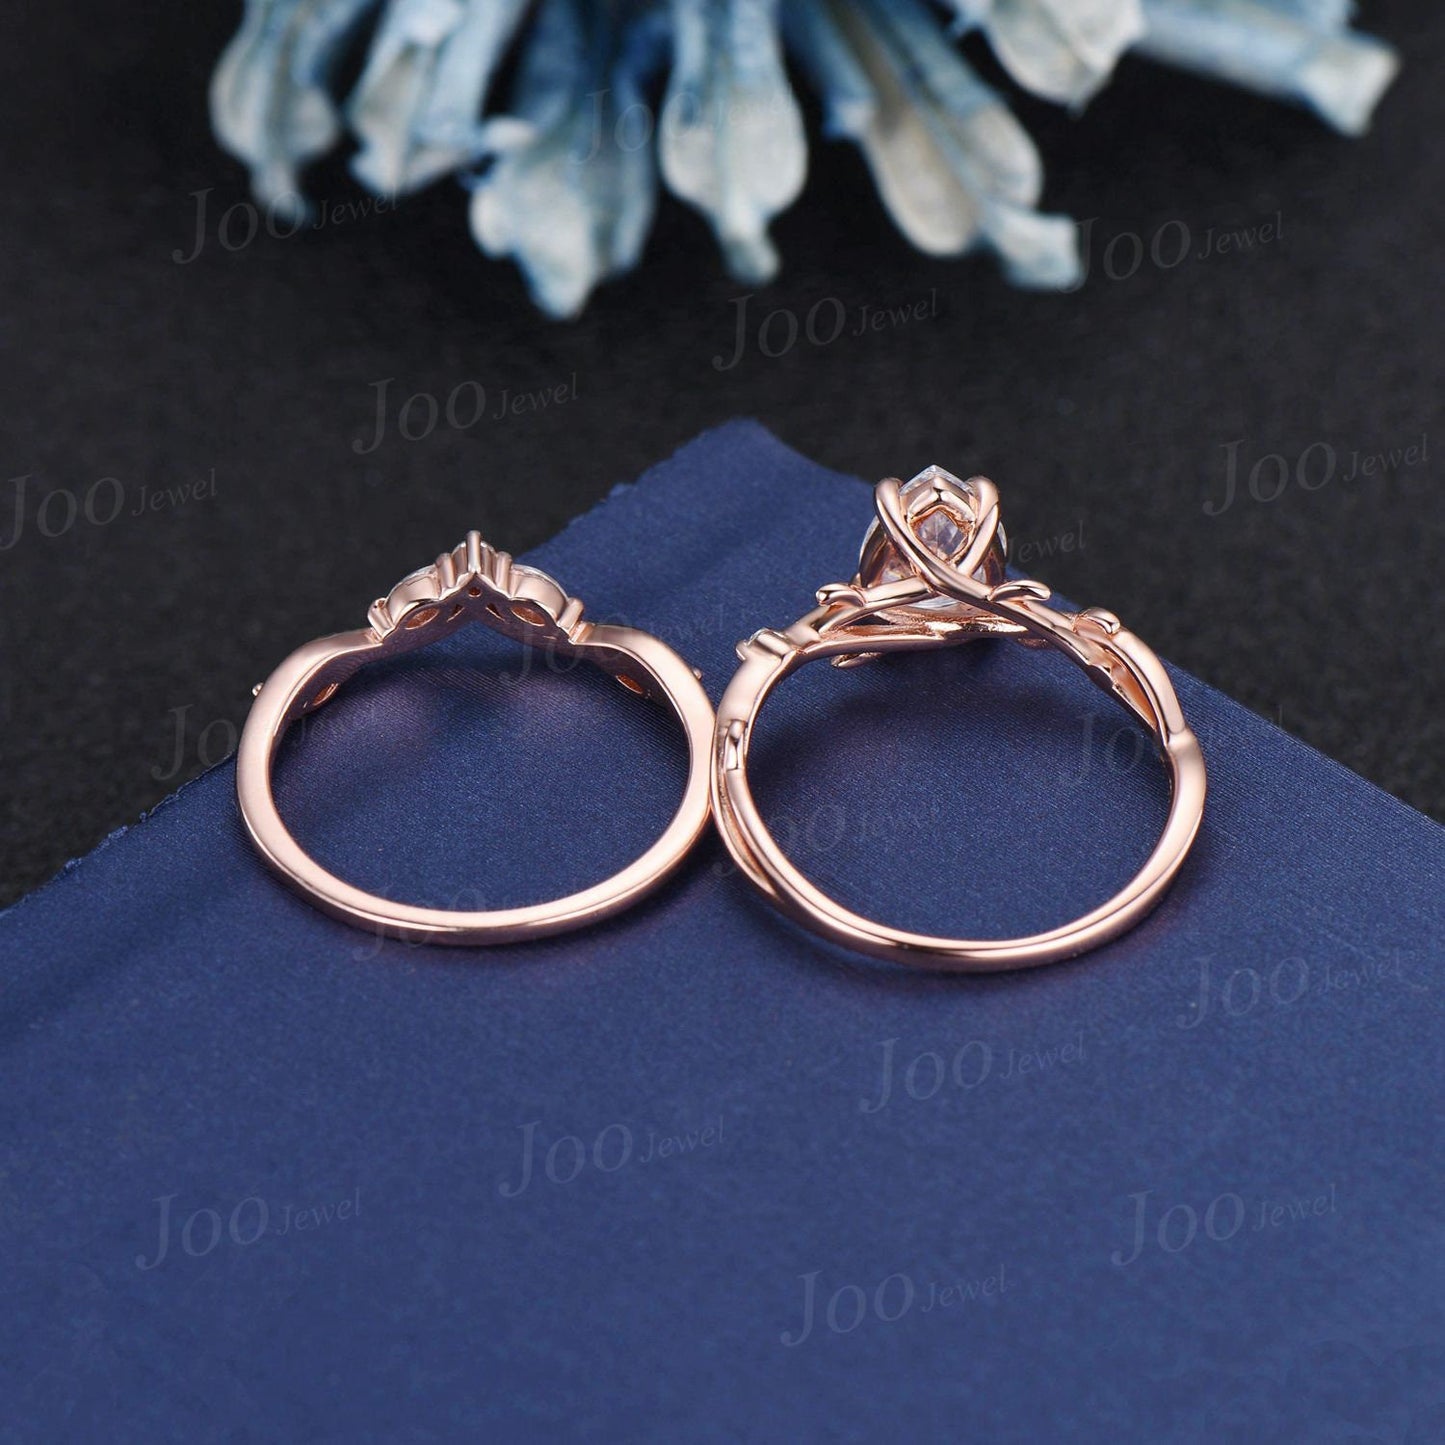 1.25ct Pear Moissanite Diamond Wedding Ring Set 14K Rose Gold Nature Inspired Twig Vine Moissanite Engagement Ring Unique Anniversary Gifts